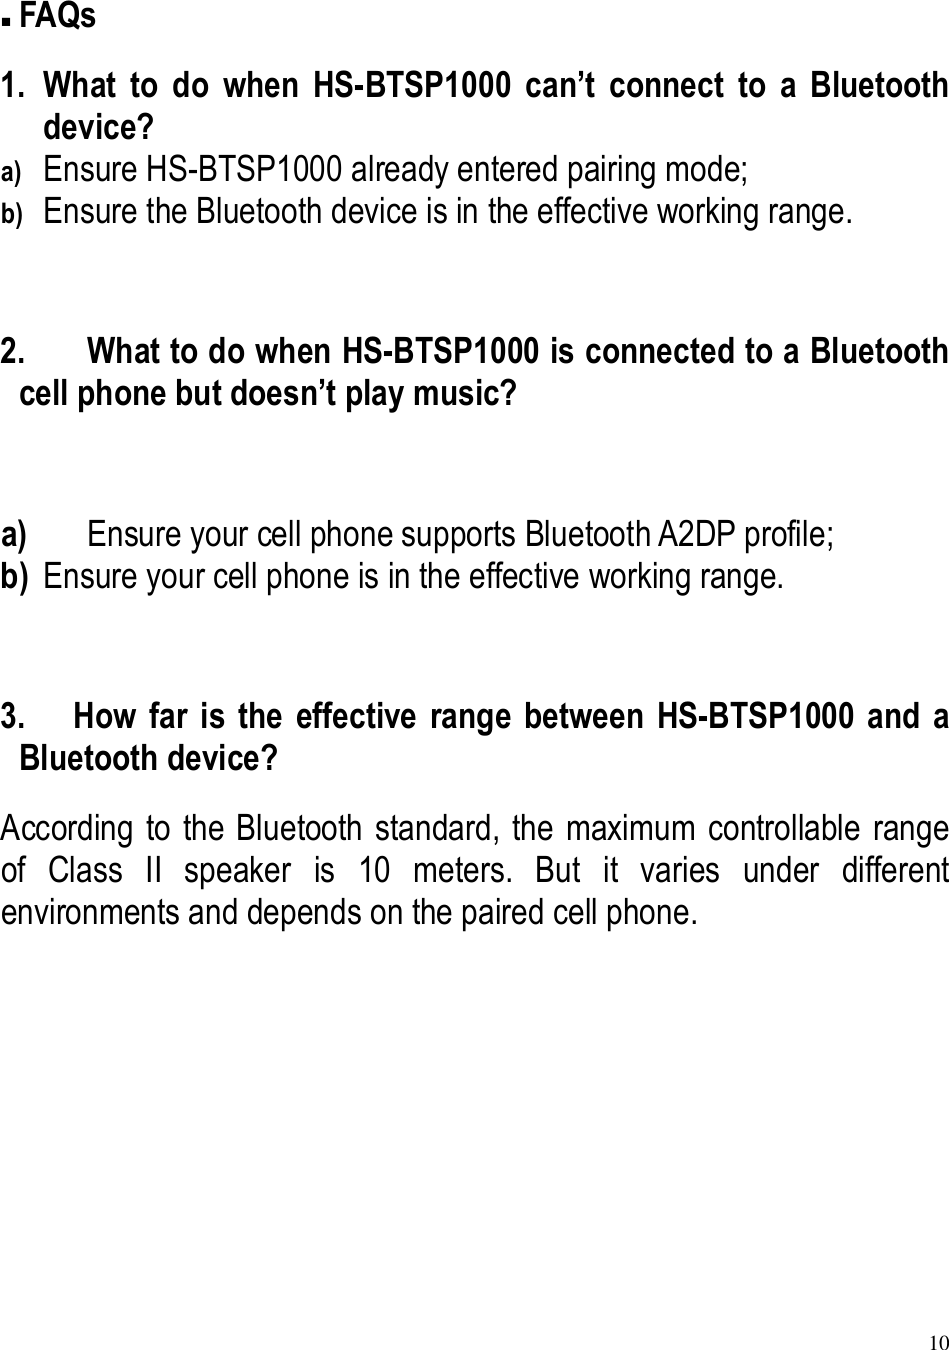 10   FAQs 1. What  to  do  when  HS-BTSP1000  can’t  connect  to  a  Bluetooth device? a) Ensure HS-BTSP1000 already entered pairing mode; b) Ensure the Bluetooth device is in the effective working range.  2. What to do when HS-BTSP1000 is connected to a Bluetooth cell phone but doesn’t play music?  a) Ensure your cell phone supports Bluetooth A2DP profile; b) Ensure your cell phone is in the effective working range.  3. How  far  is  the  effective  range  between  HS-BTSP1000  and  a Bluetooth device? According to the Bluetooth standard, the maximum controllable range of  Class  II  speaker  is  10  meters.  But  it  varies  under  different environments and depends on the paired cell phone.      